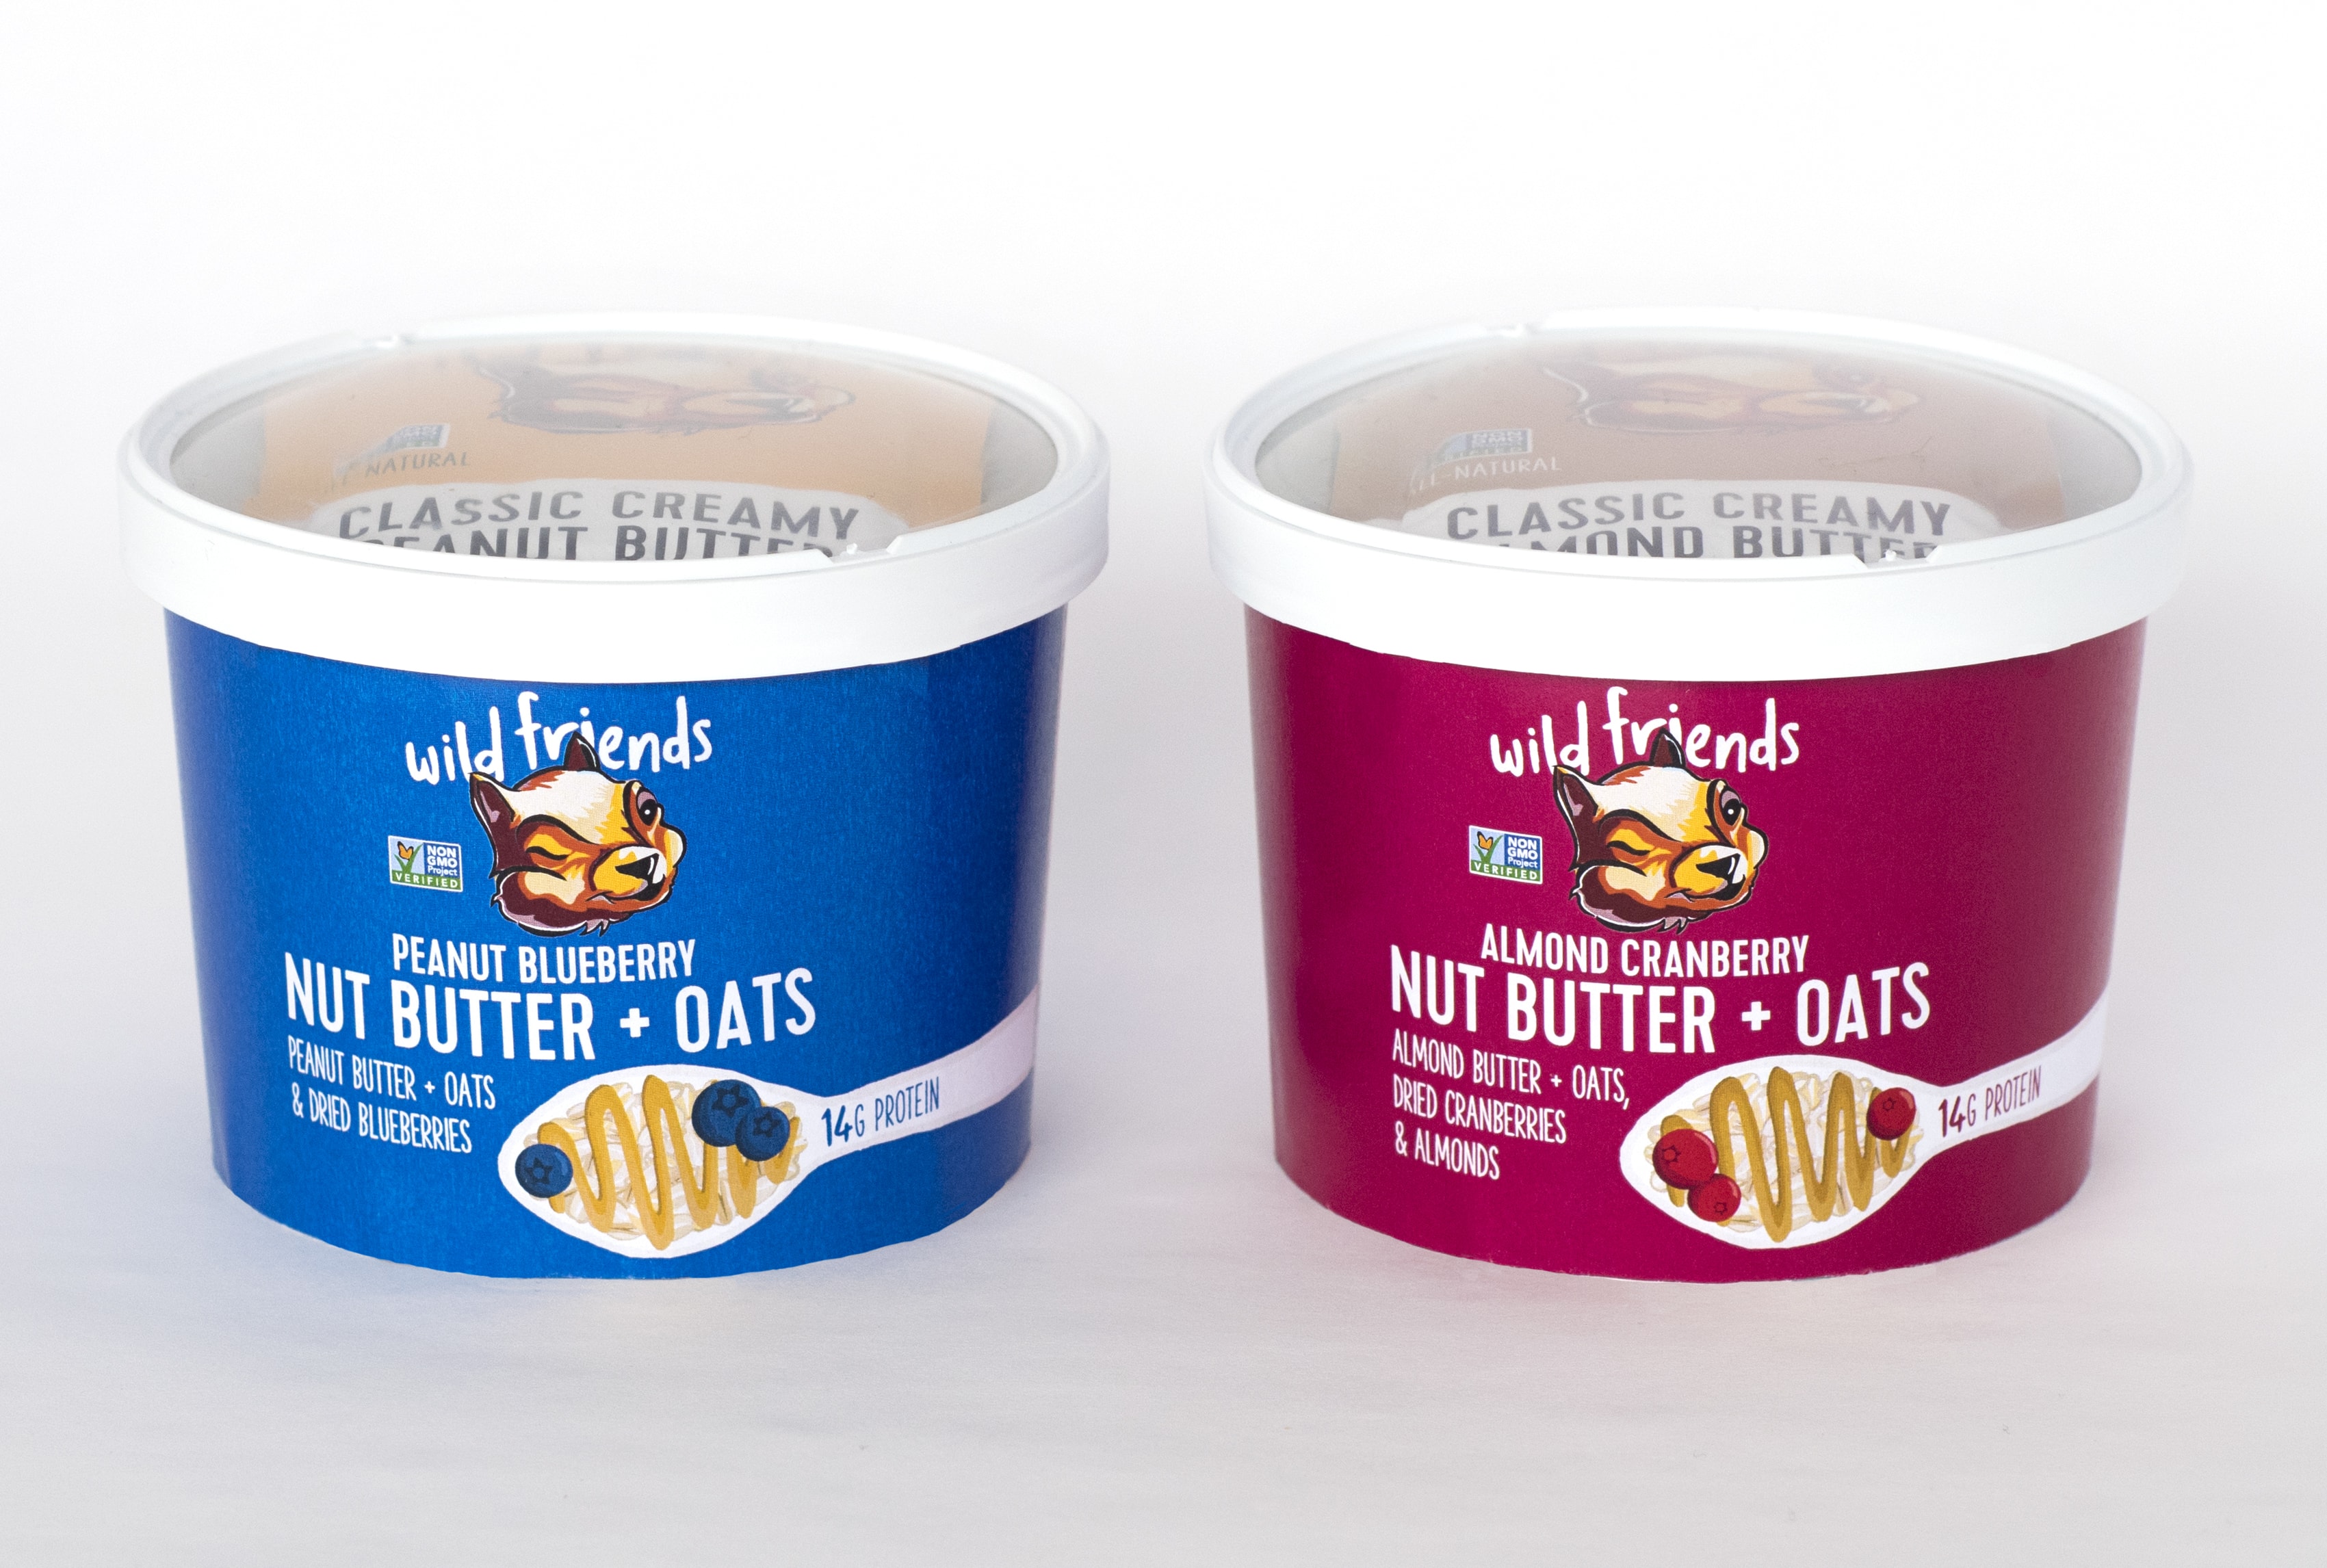 Wild Friends' two new Nut Butter Oats flavors: Peanut Blueberry with Classic Peanut Butter and Almond Cranberry with Classic Almond Butter.